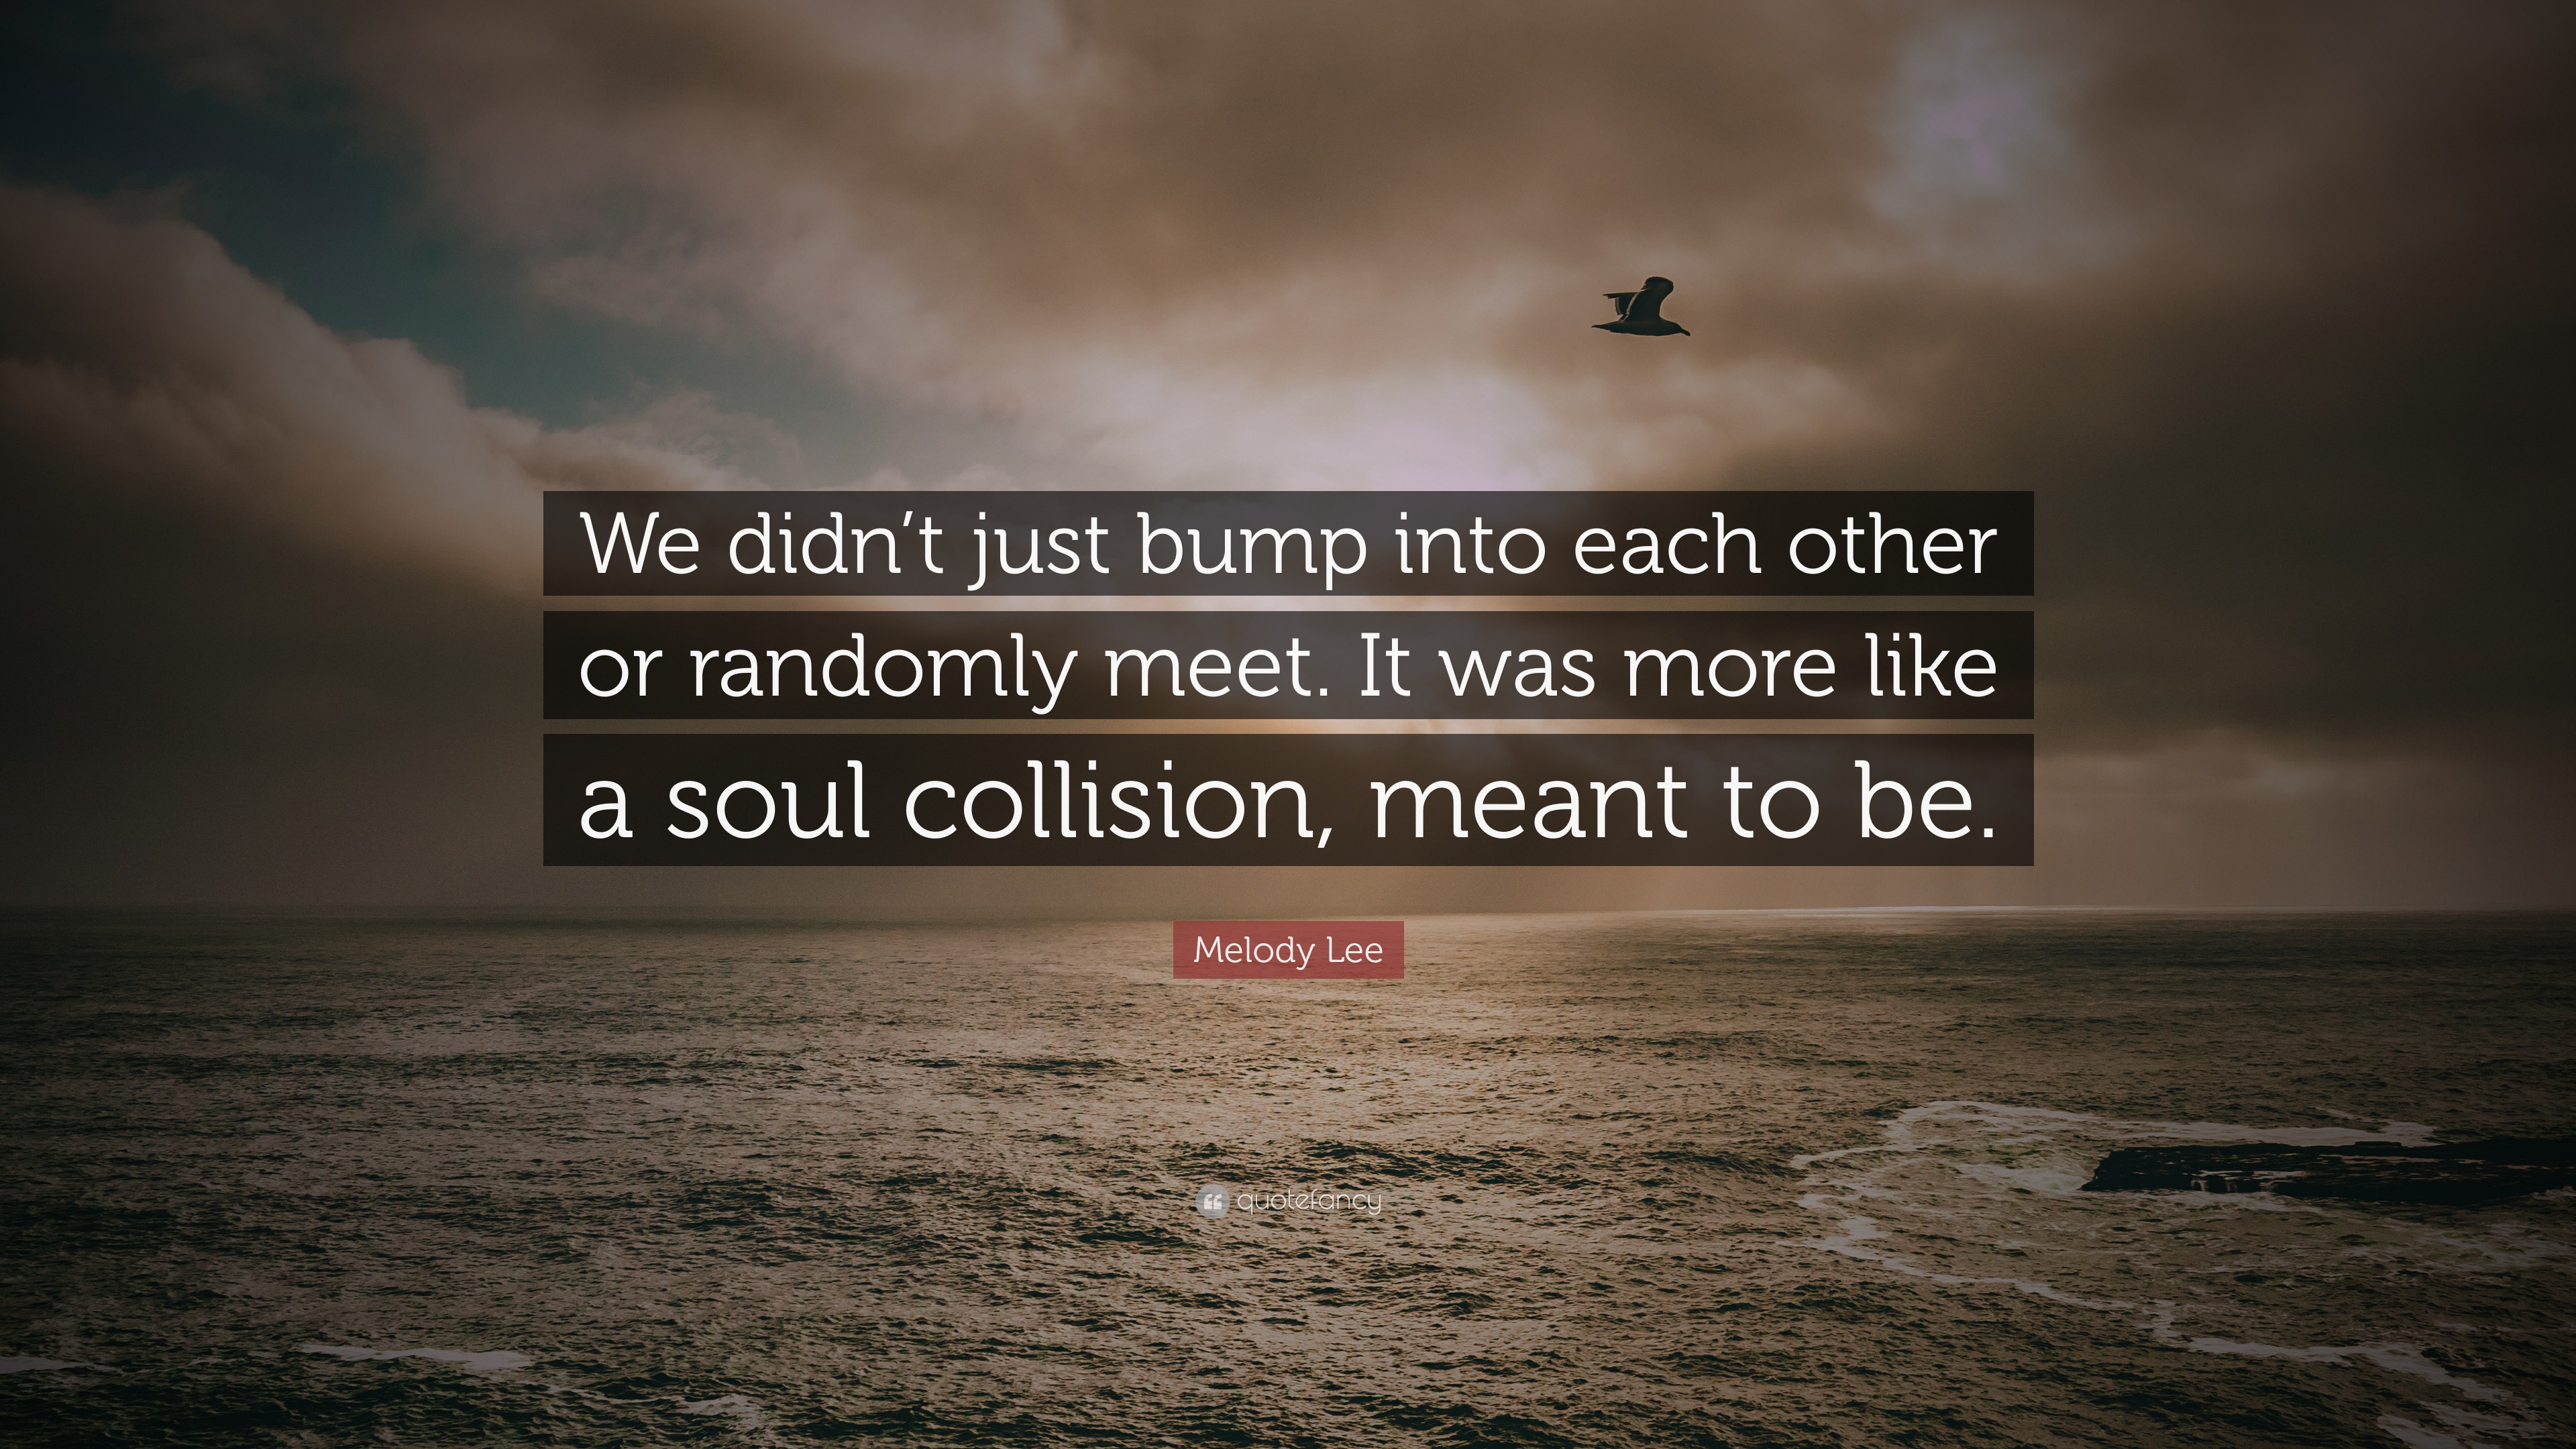 Melody Lee Quote: “We didn’t just bump into each other or randomly meet ...